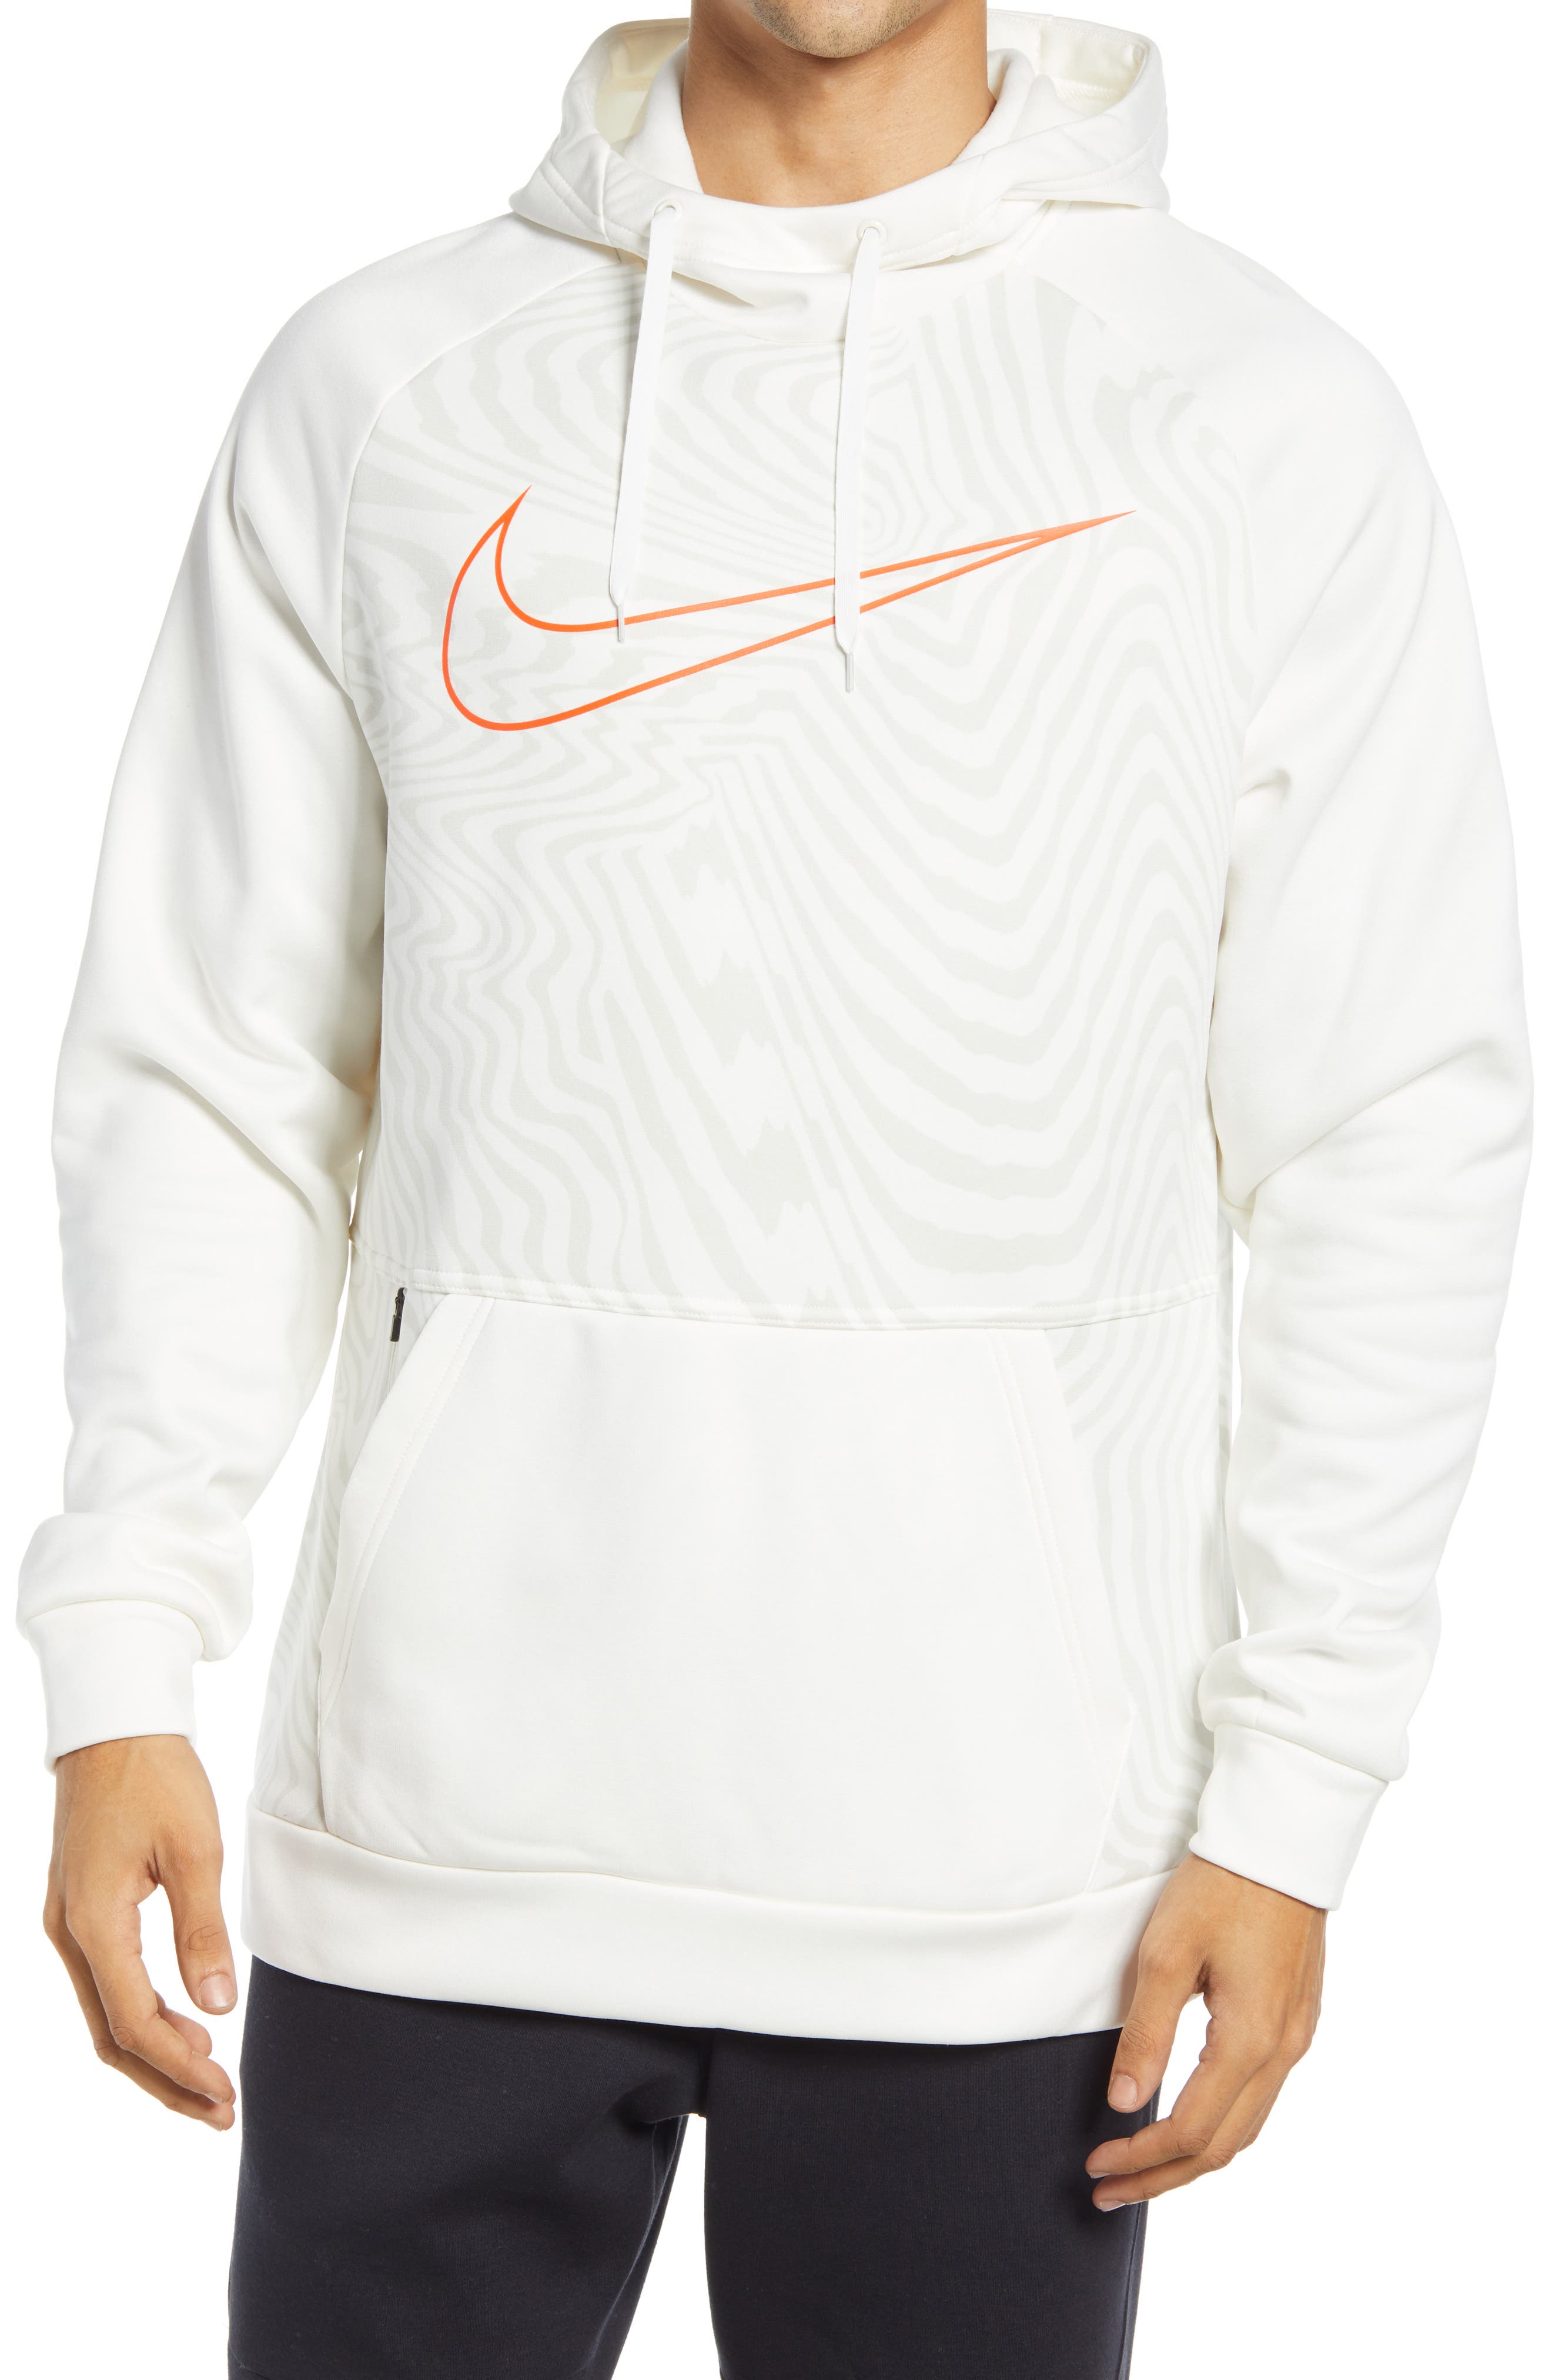 nike training clothes sale